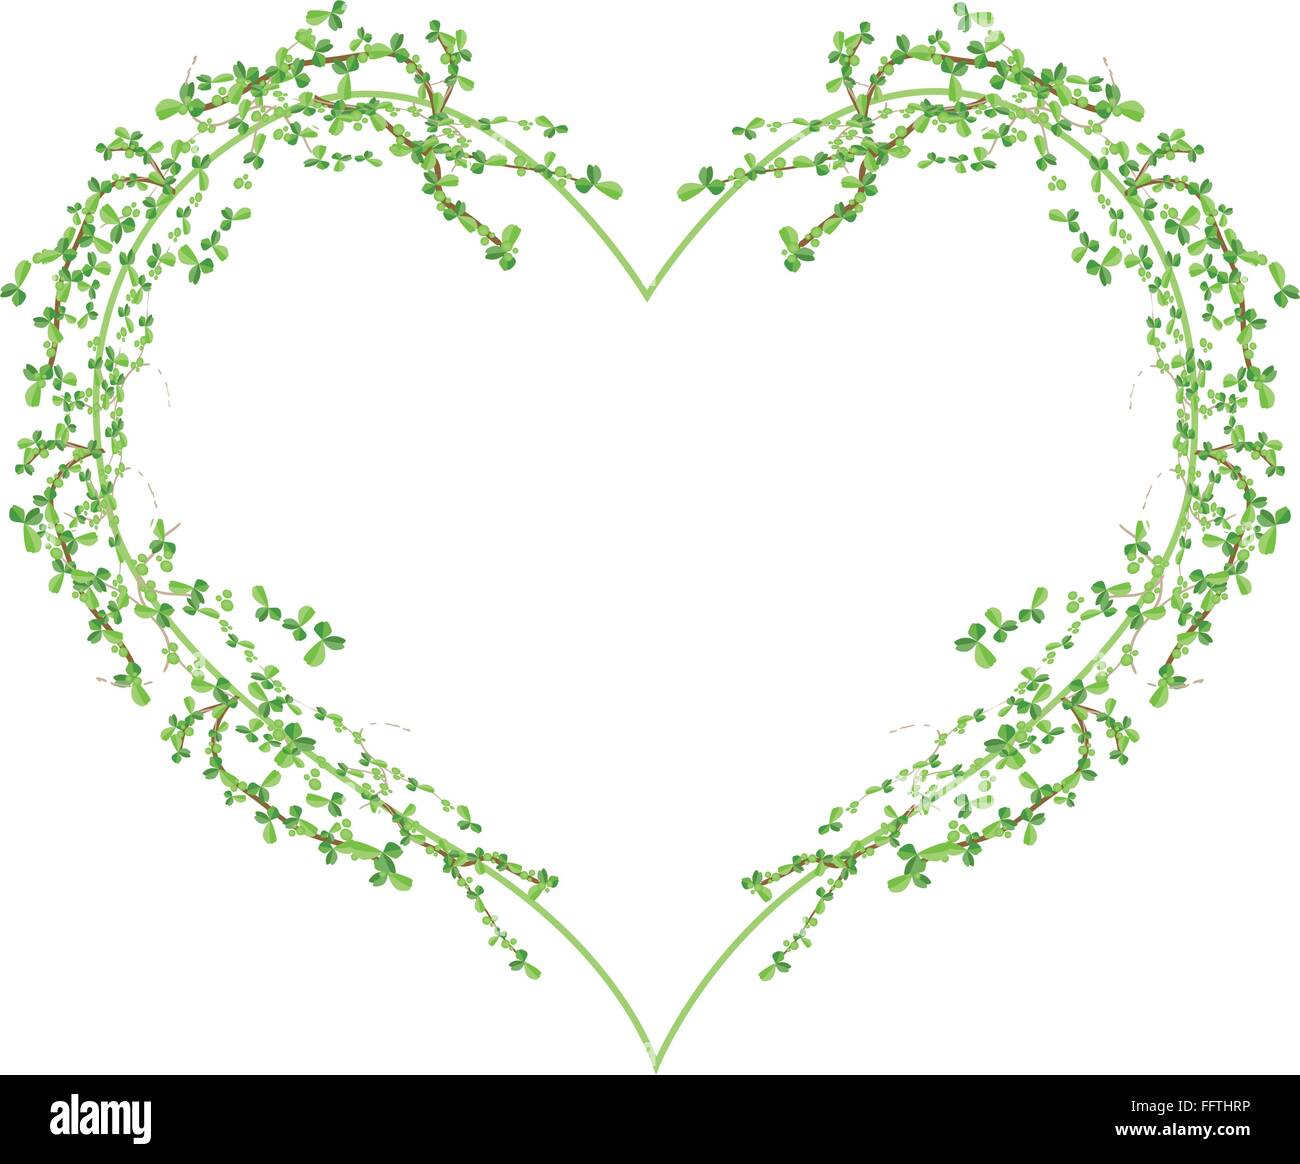 Love Concept, Illustration of Carmona Retusa (Vahl) or Masam Plants Forming in Heart Shape Isolated on White Background. Stock Vector